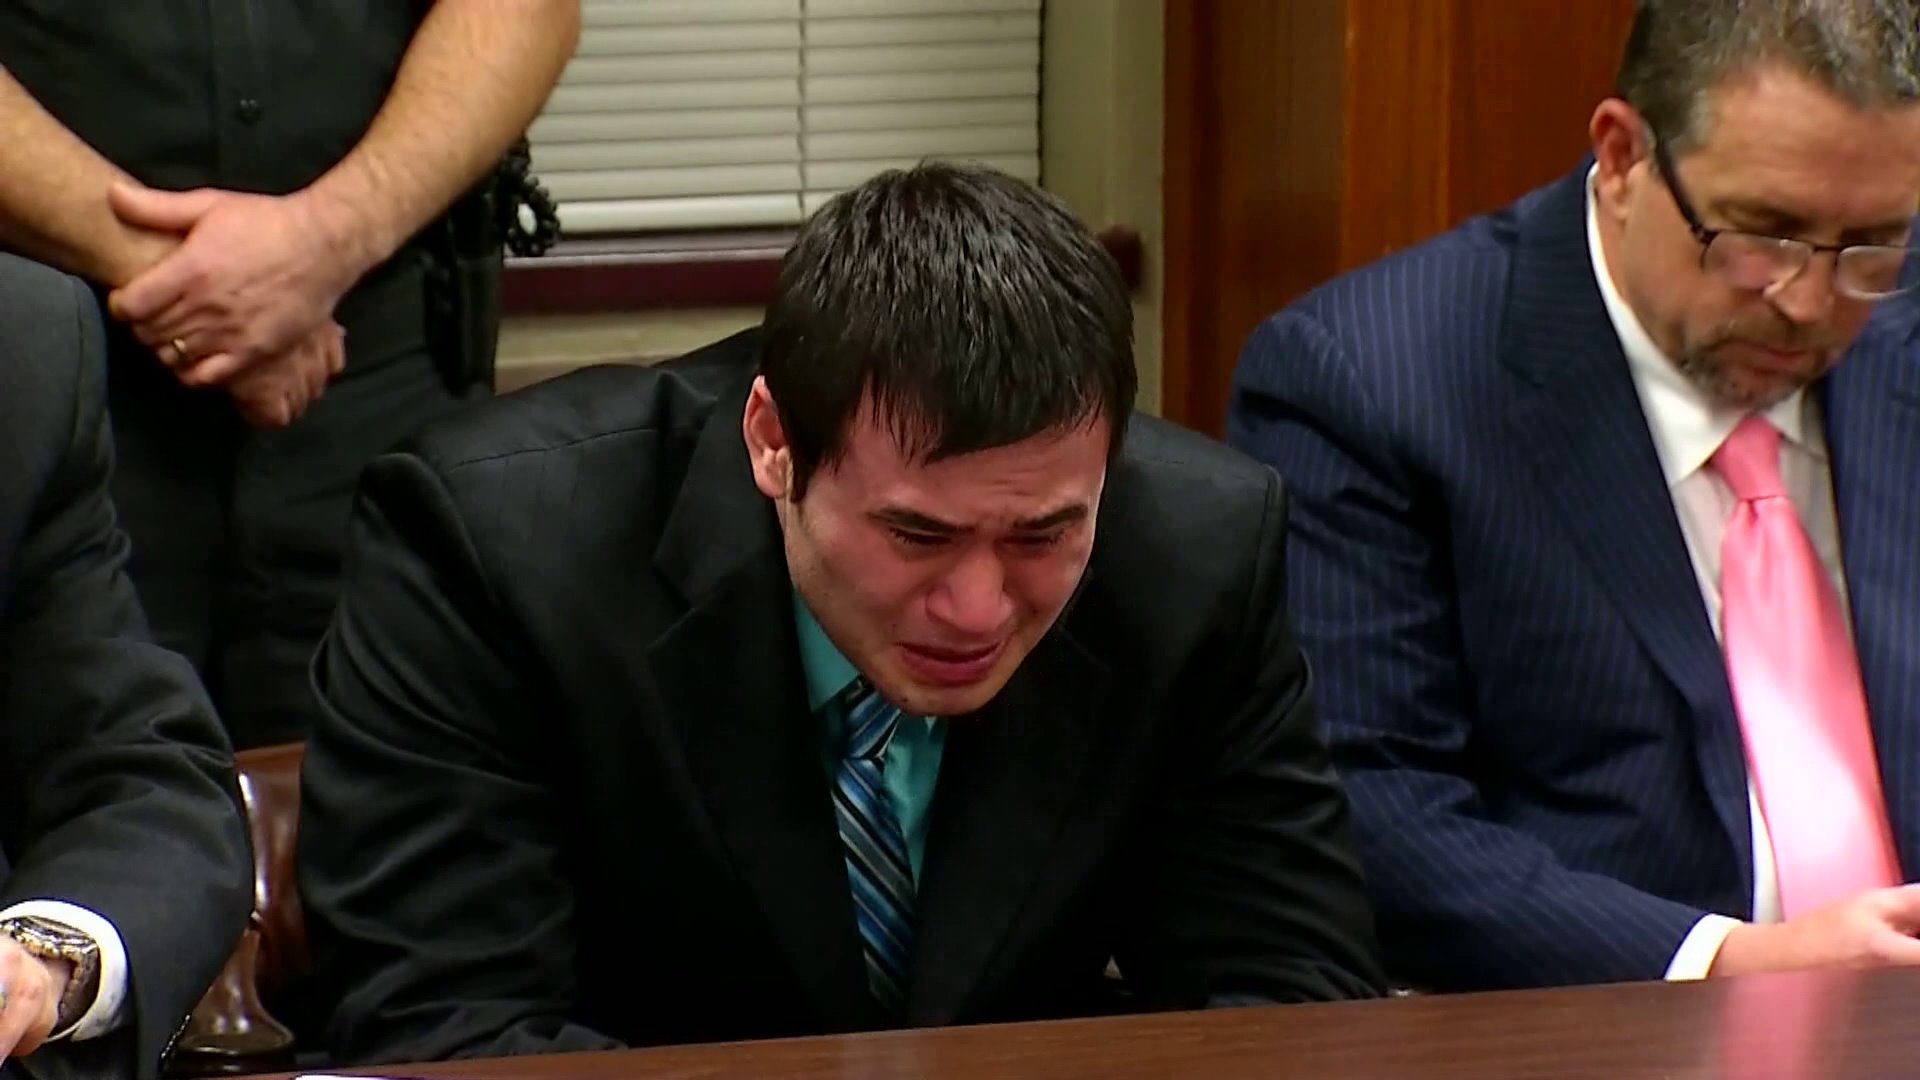 The jury recommended Daniel Holtzclaw be sentenced to 263 years in prison for his crimes.